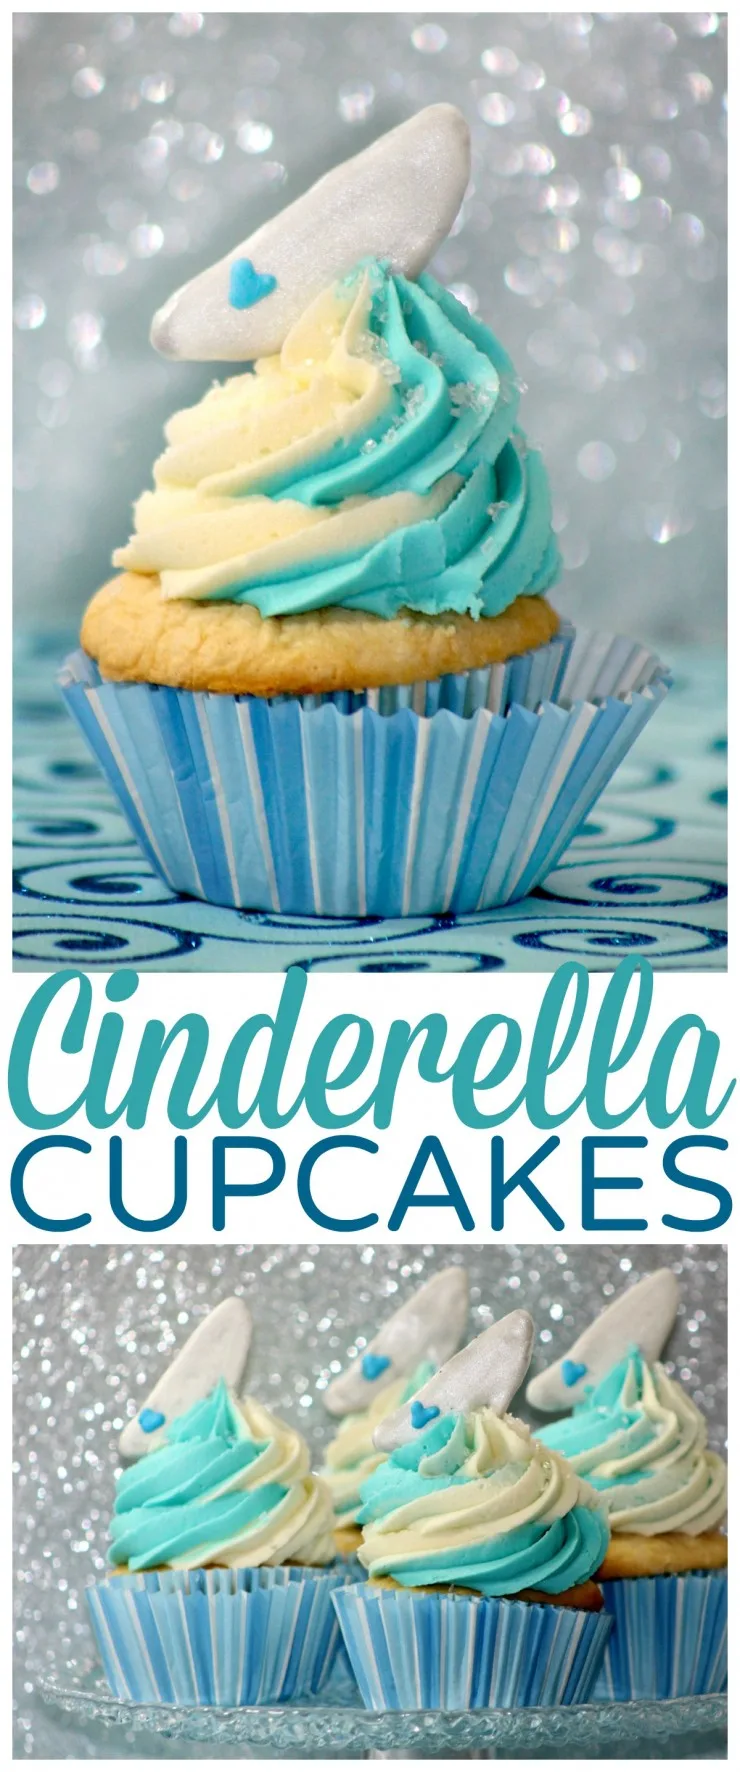 Disney's Cinderella cupcakes are inspired by Princess Cinderella and her glass slipper. Perfect for Cinderella themed parties & those who just love Disney!